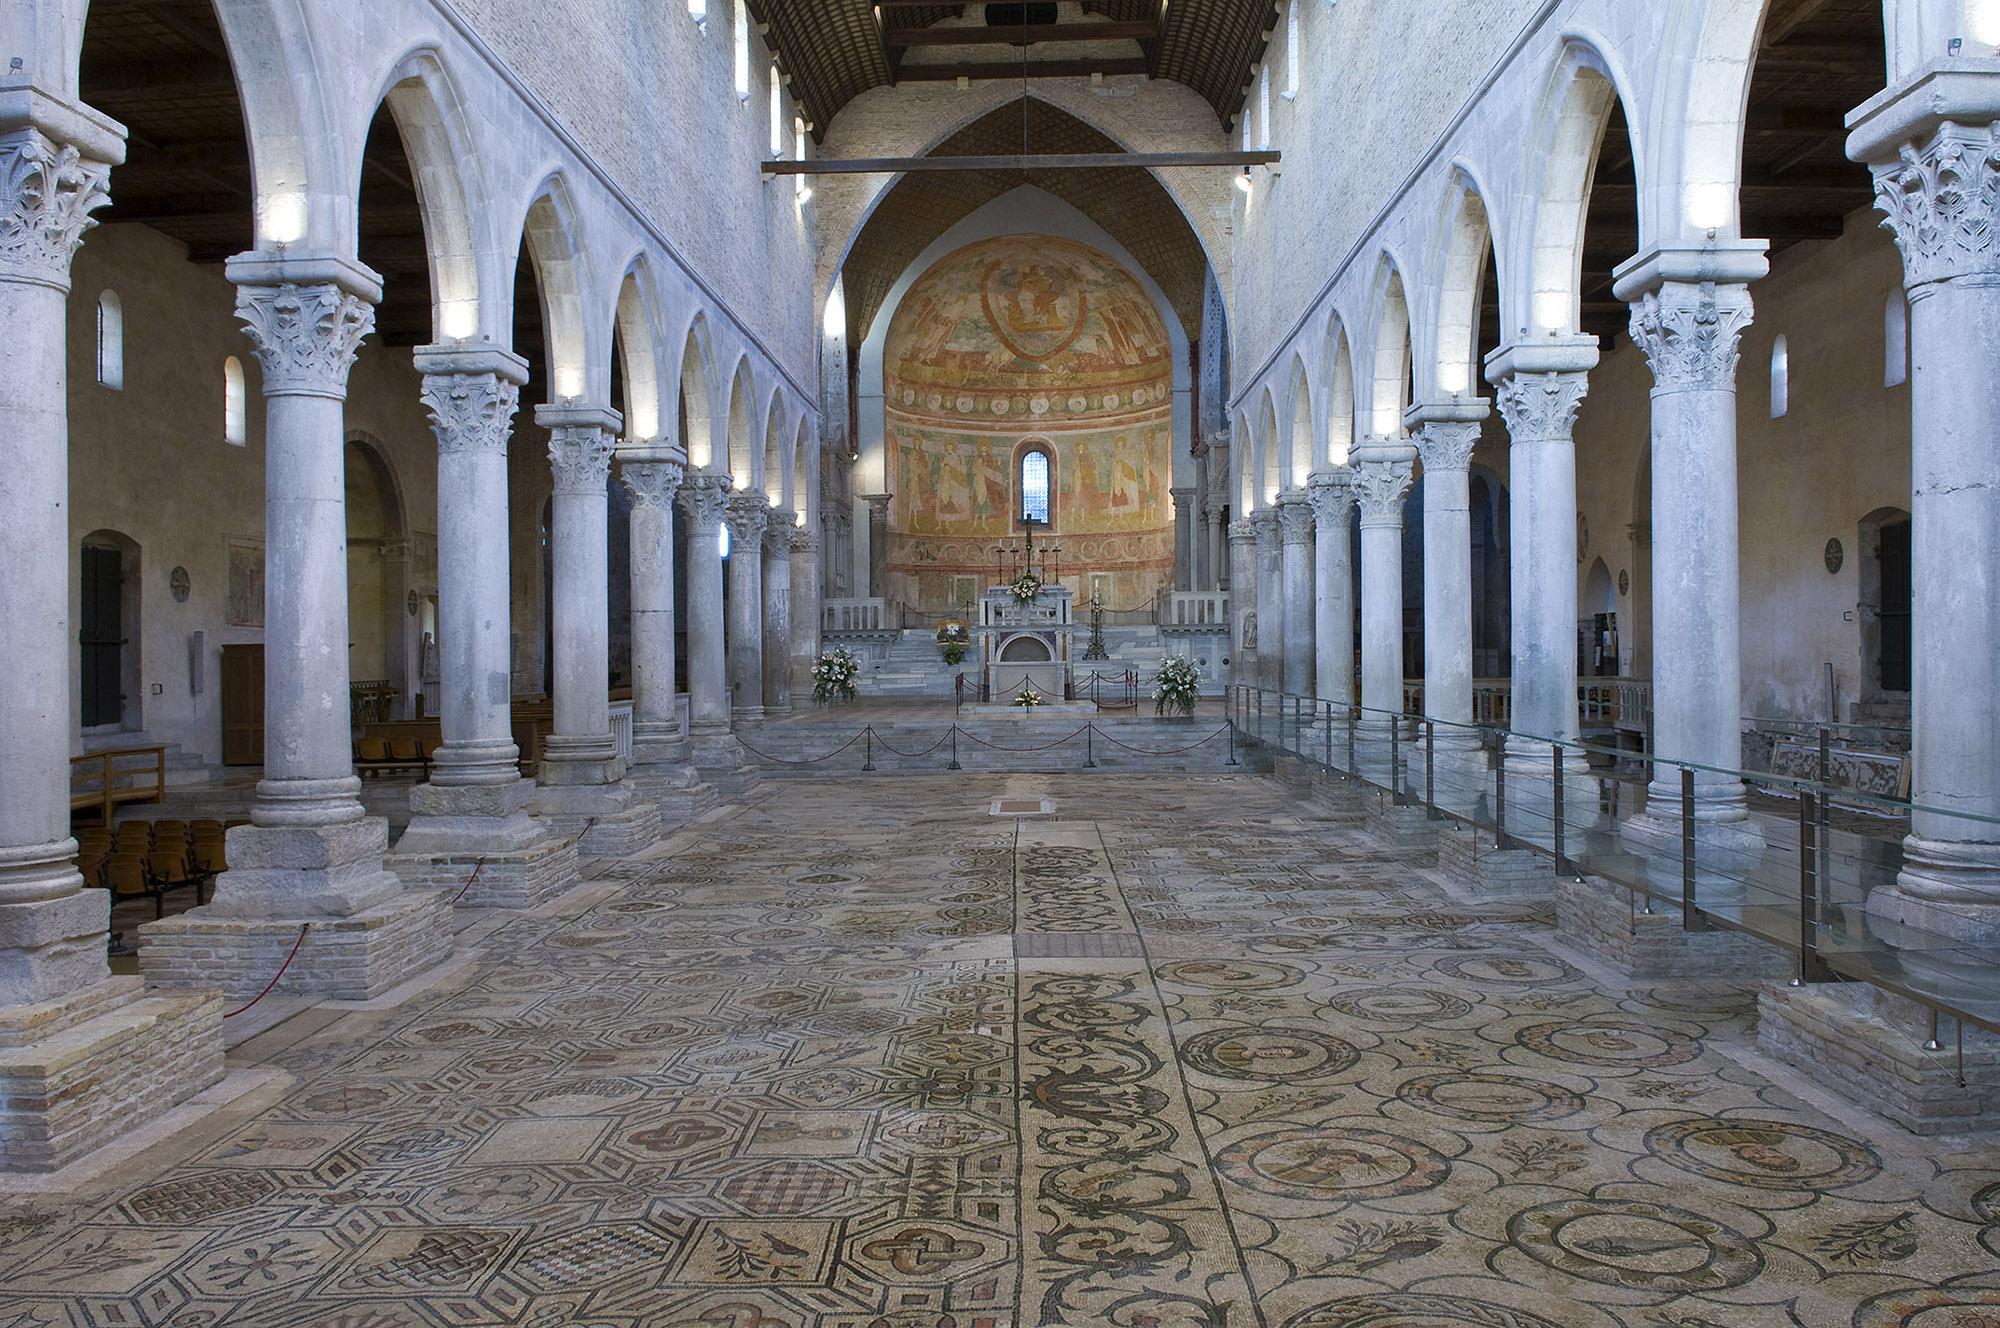 The basilica is the most important Christian landmark in Aquileia and is world renowned for its stunning mosaic from the 4th century AD.- © Gianluca Baronchelli